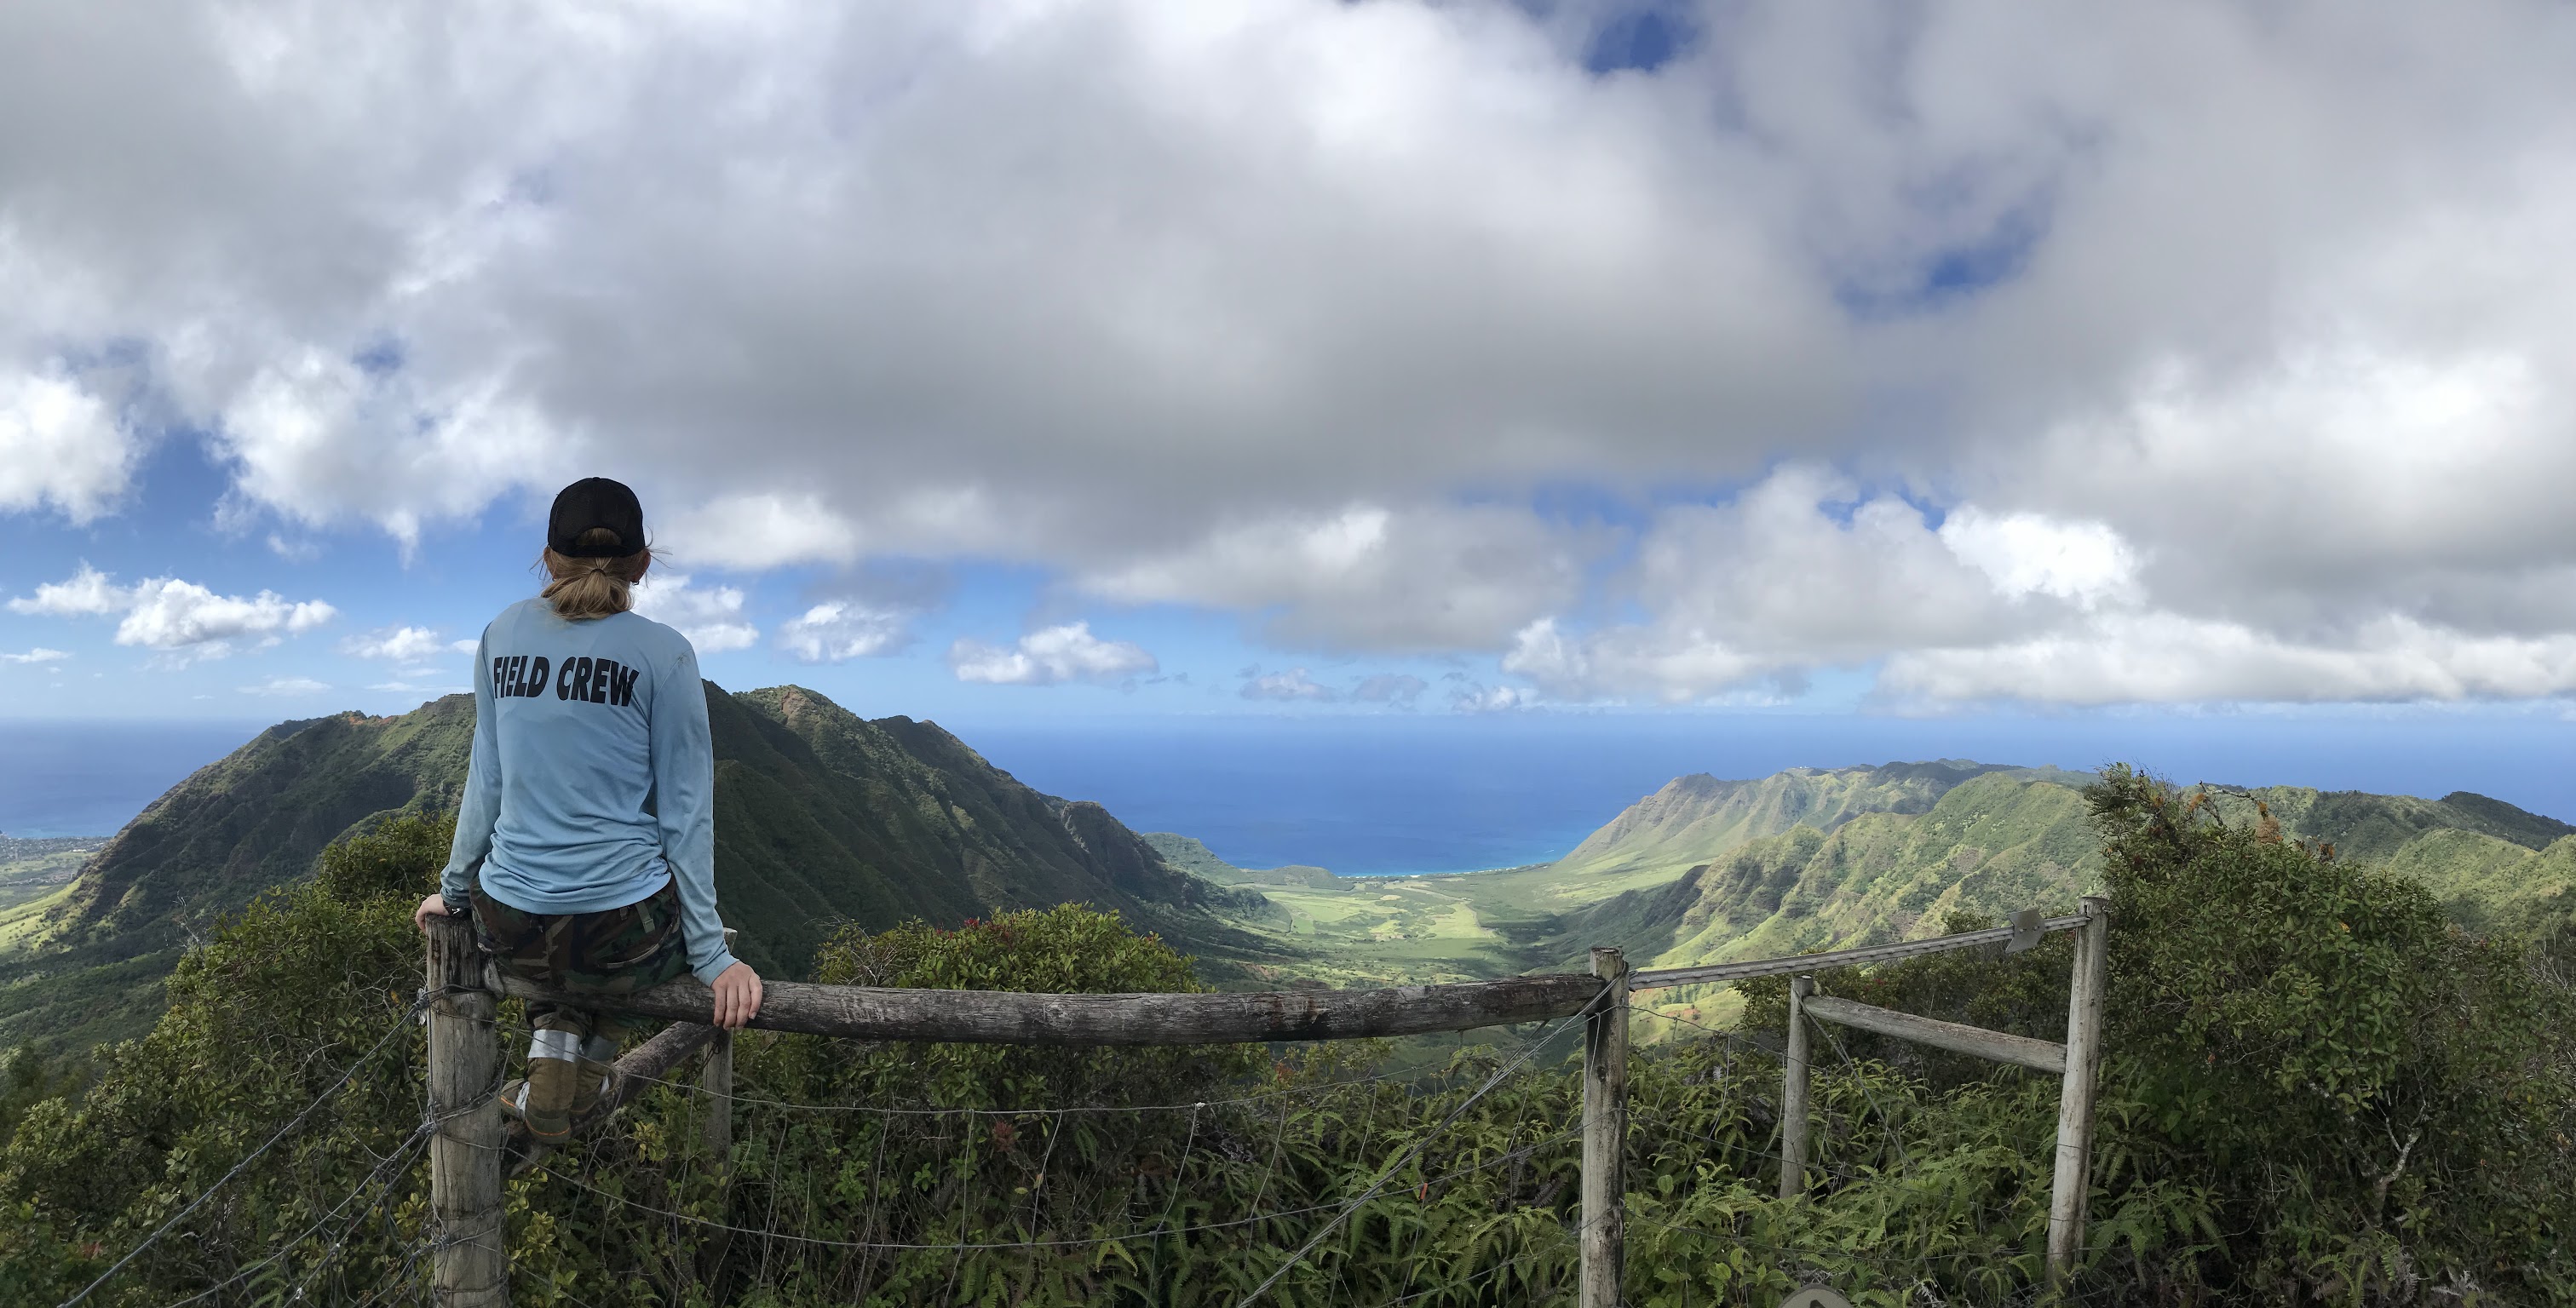 Admiring the views from the Wai’anae Mountains as we surveyed for the invasive plant species Chromolaeana odorata.